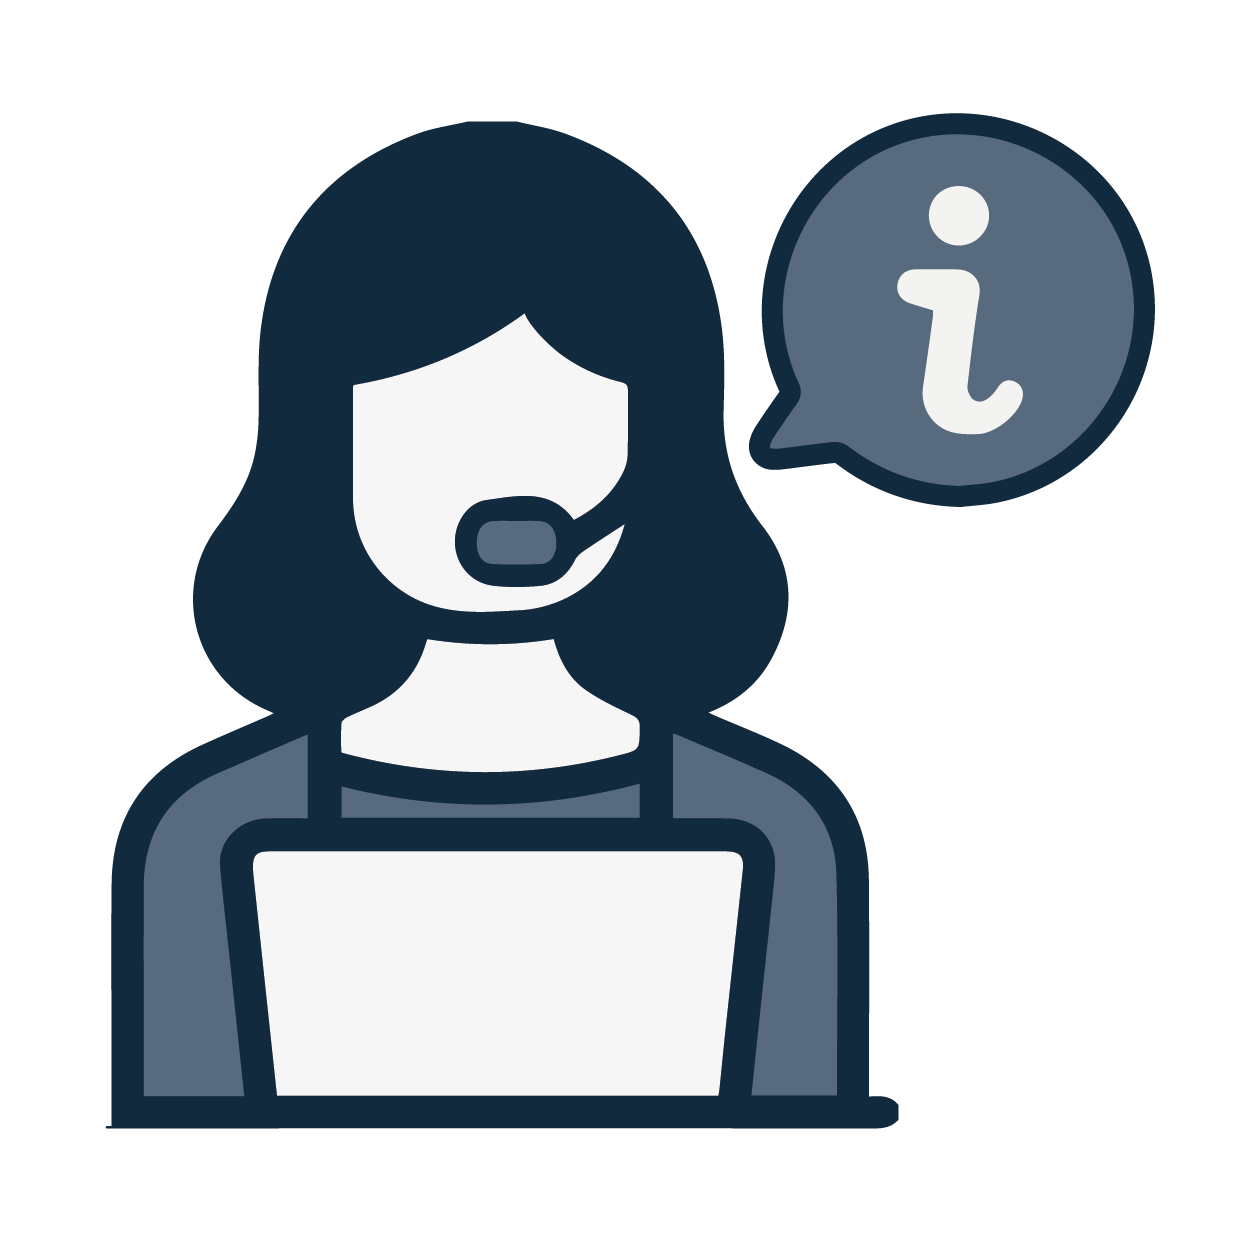 icon image of a person with a headset and speech bubble with information